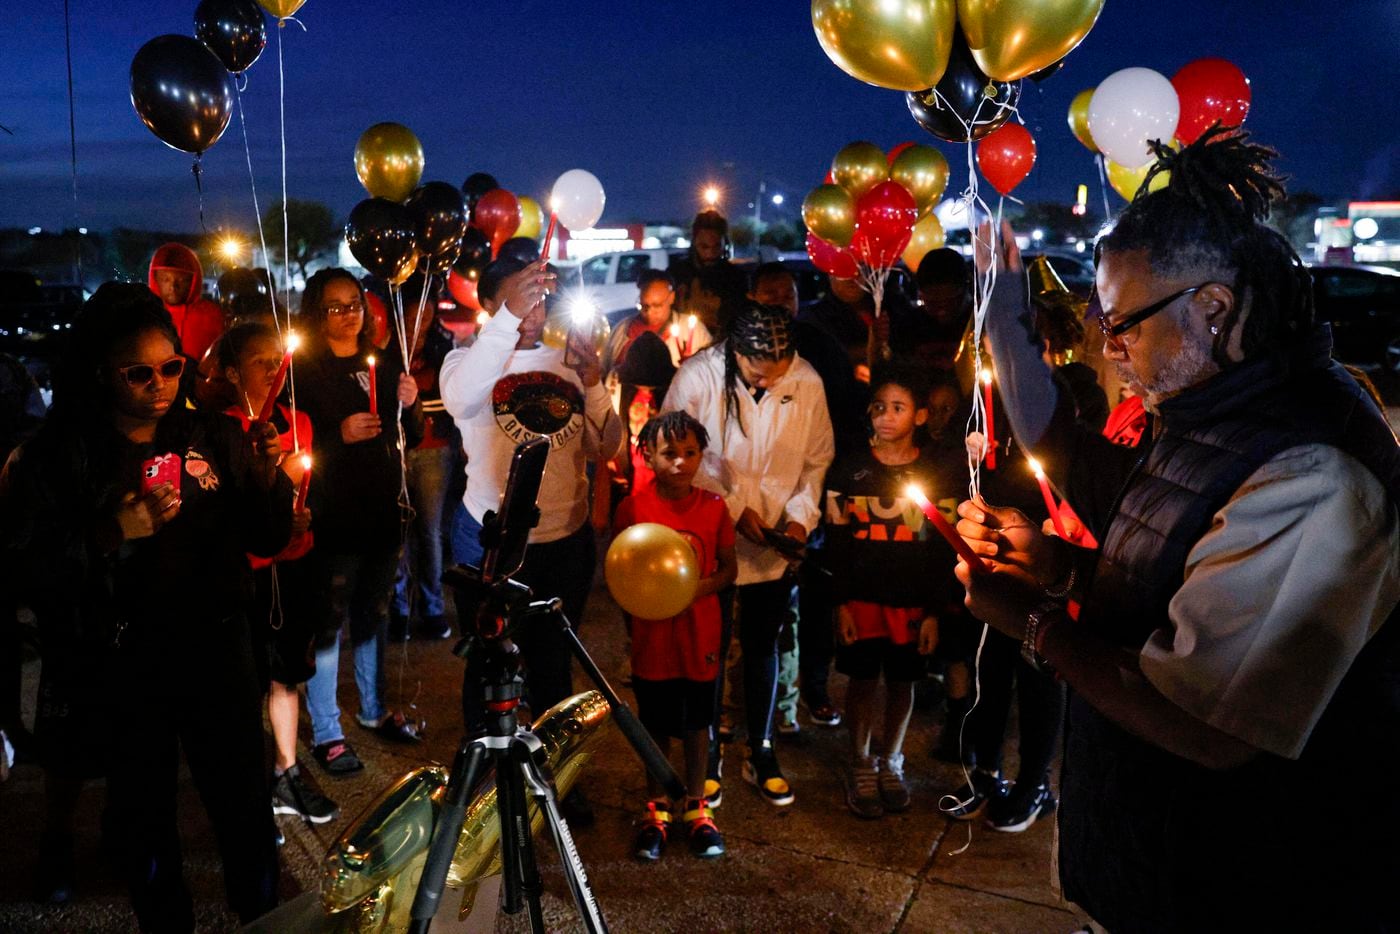 Preston Malone II says a prayer before a balloon release in memory of 11-year-old De’Evan...